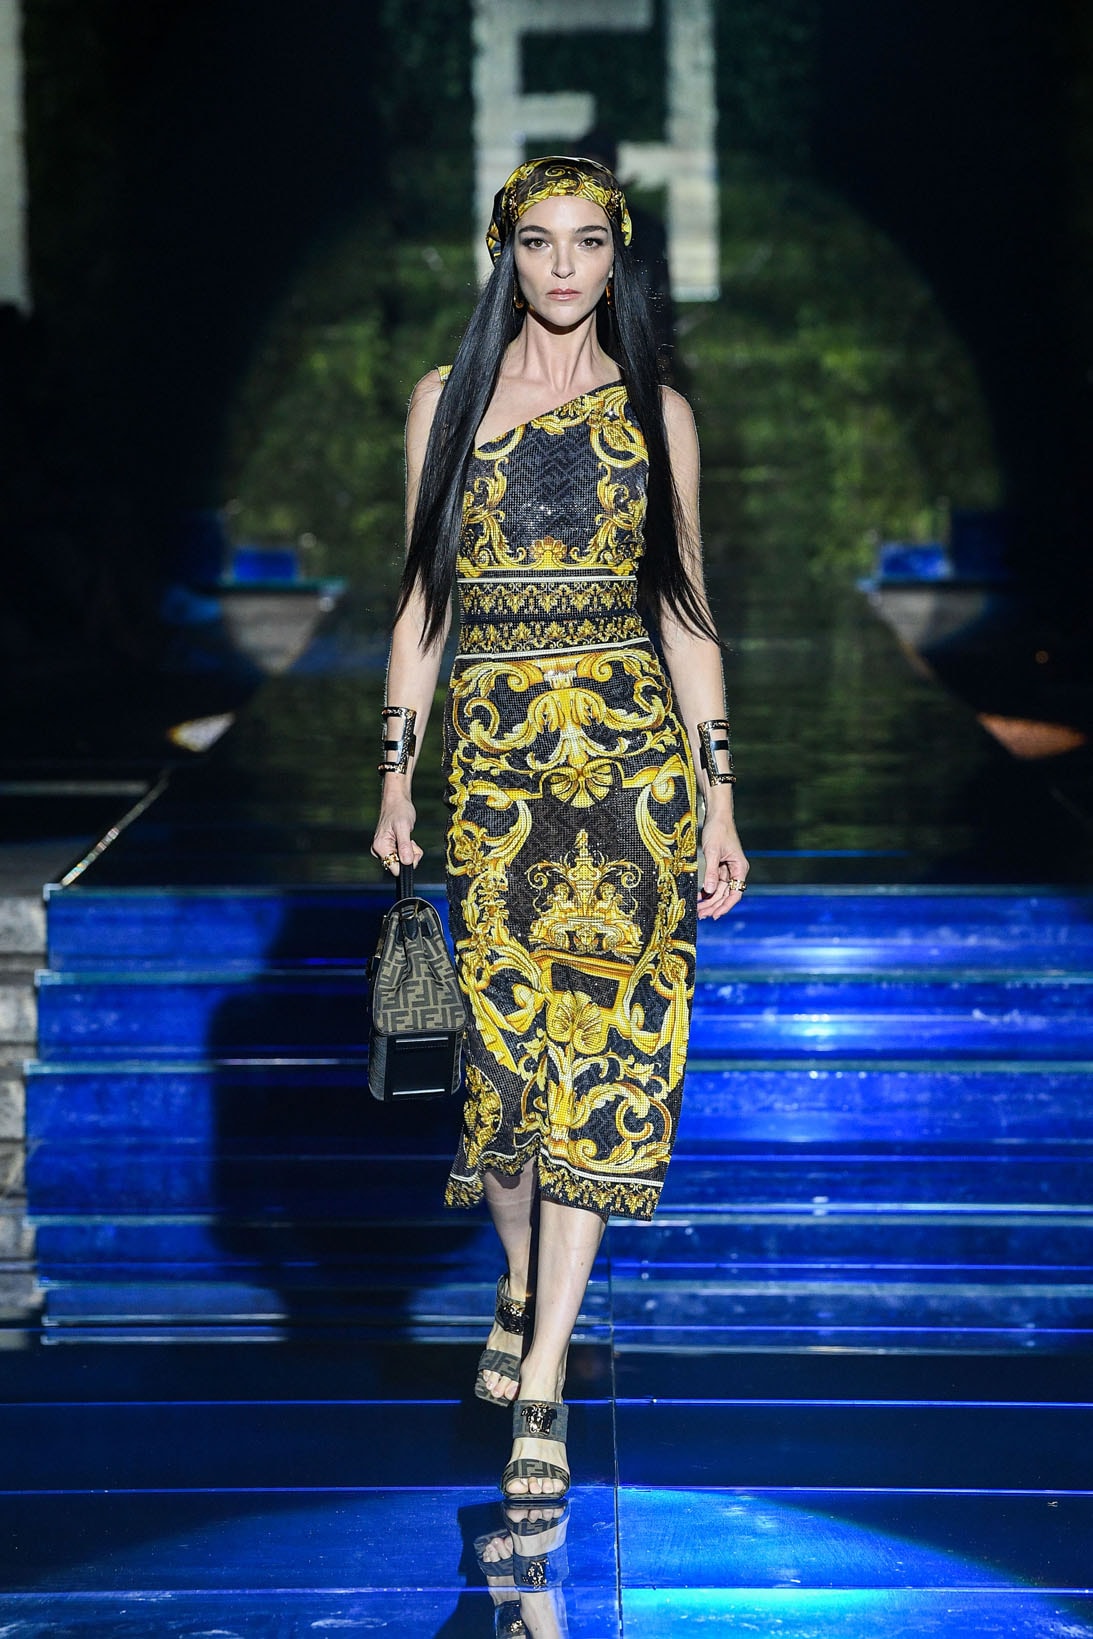 Fendi and Versace Drop Much-Anticipated Fendace Collection